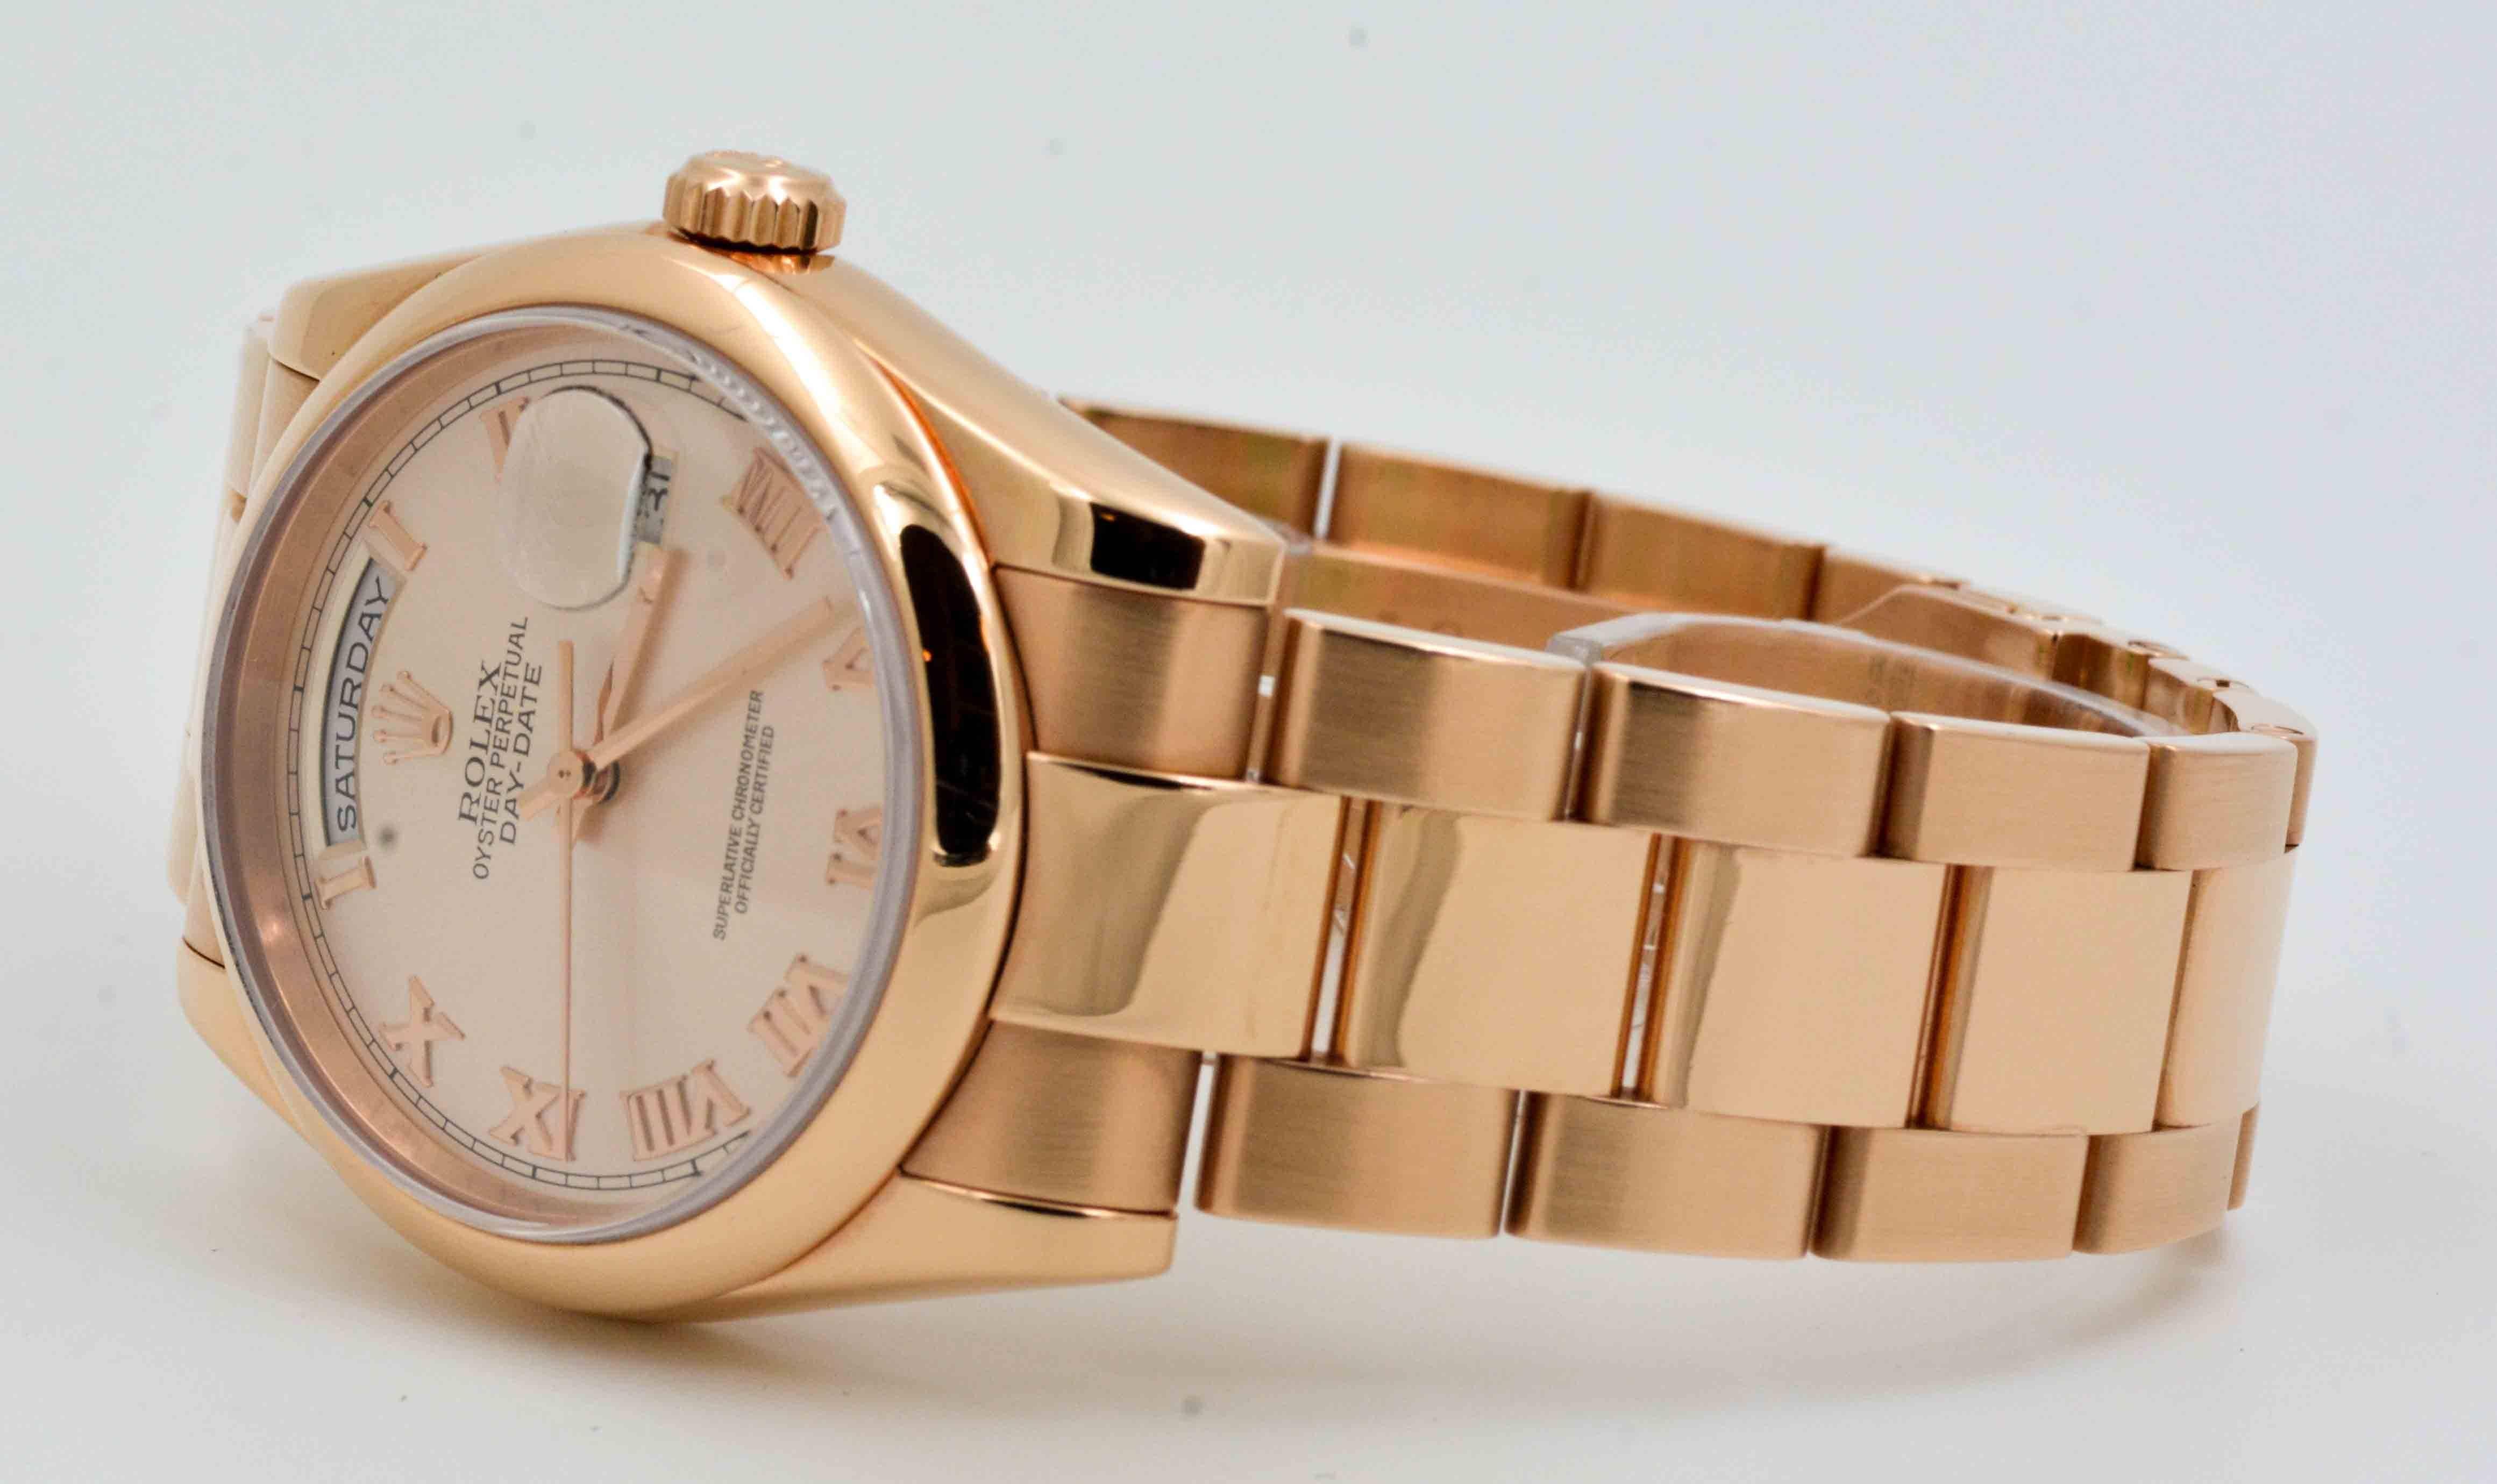 Classical styling, timeless form and function are found in this beautiful Presidential Rolex Day Date 36mm watch crafted in 18kt rose gold. Rolex used their classic domed bezel to frame the beautiful and timeless pink dial with Roman numerals. Rolex